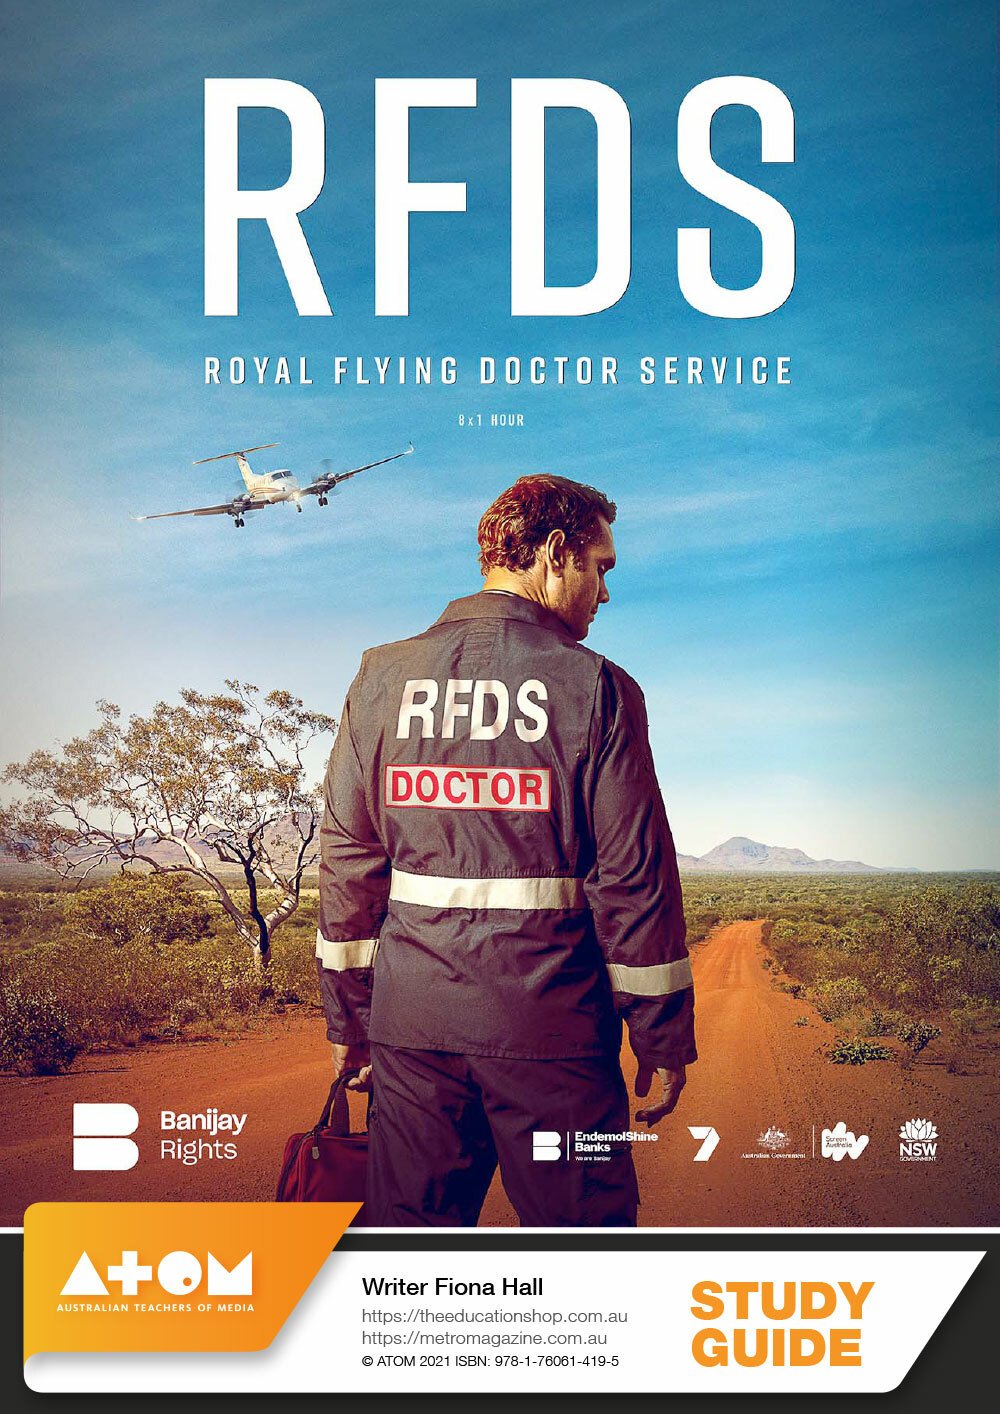     - RFDS- Royal Flying Doctor Service